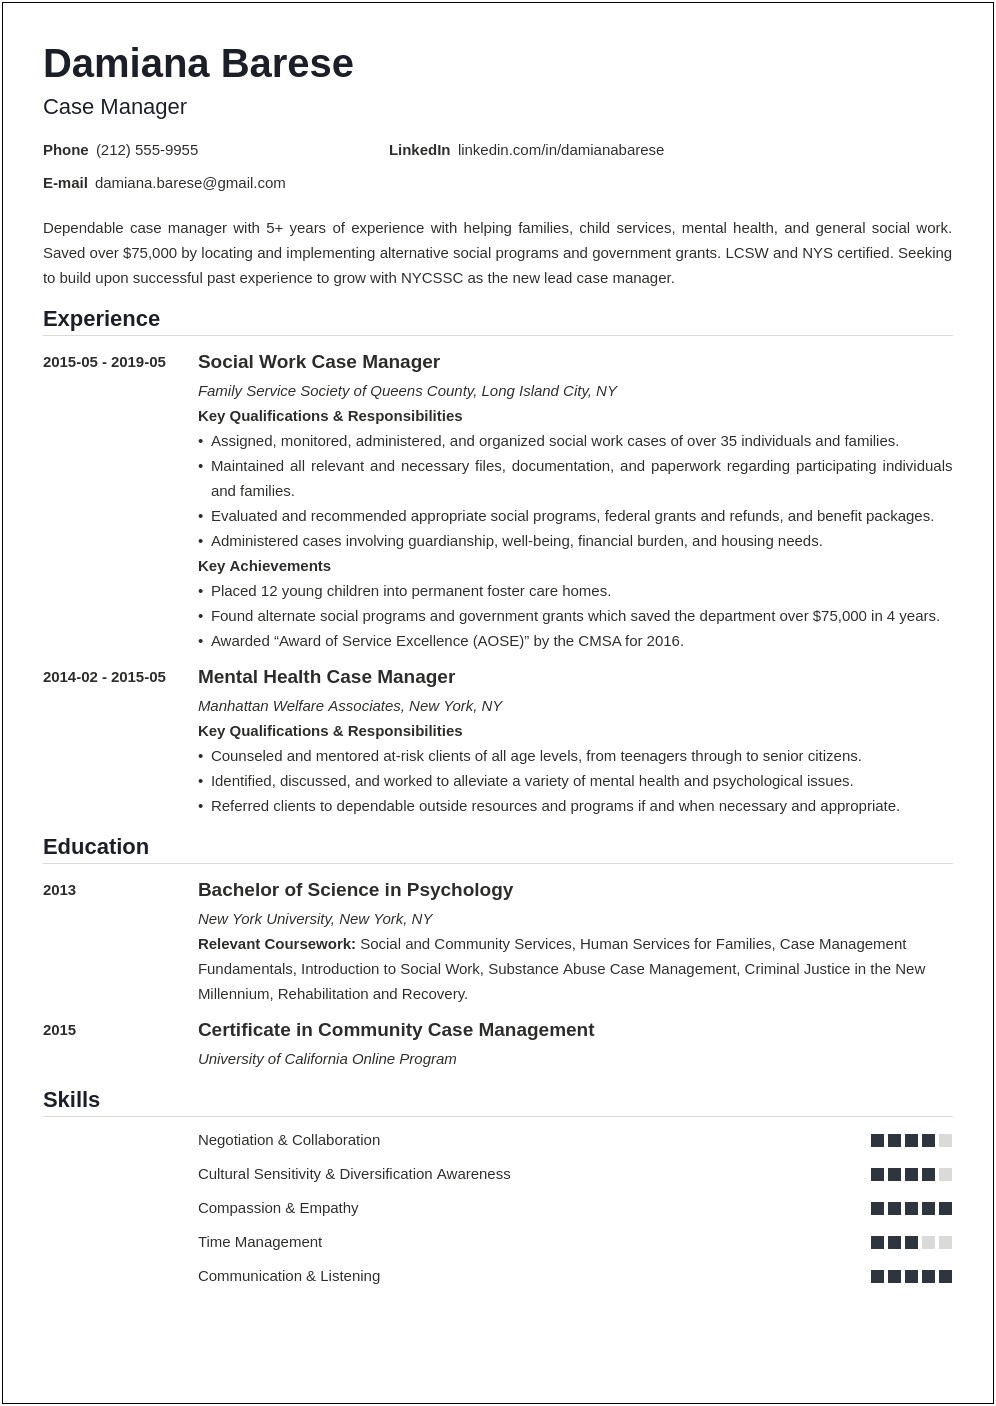 Resume Tips For Case Manager